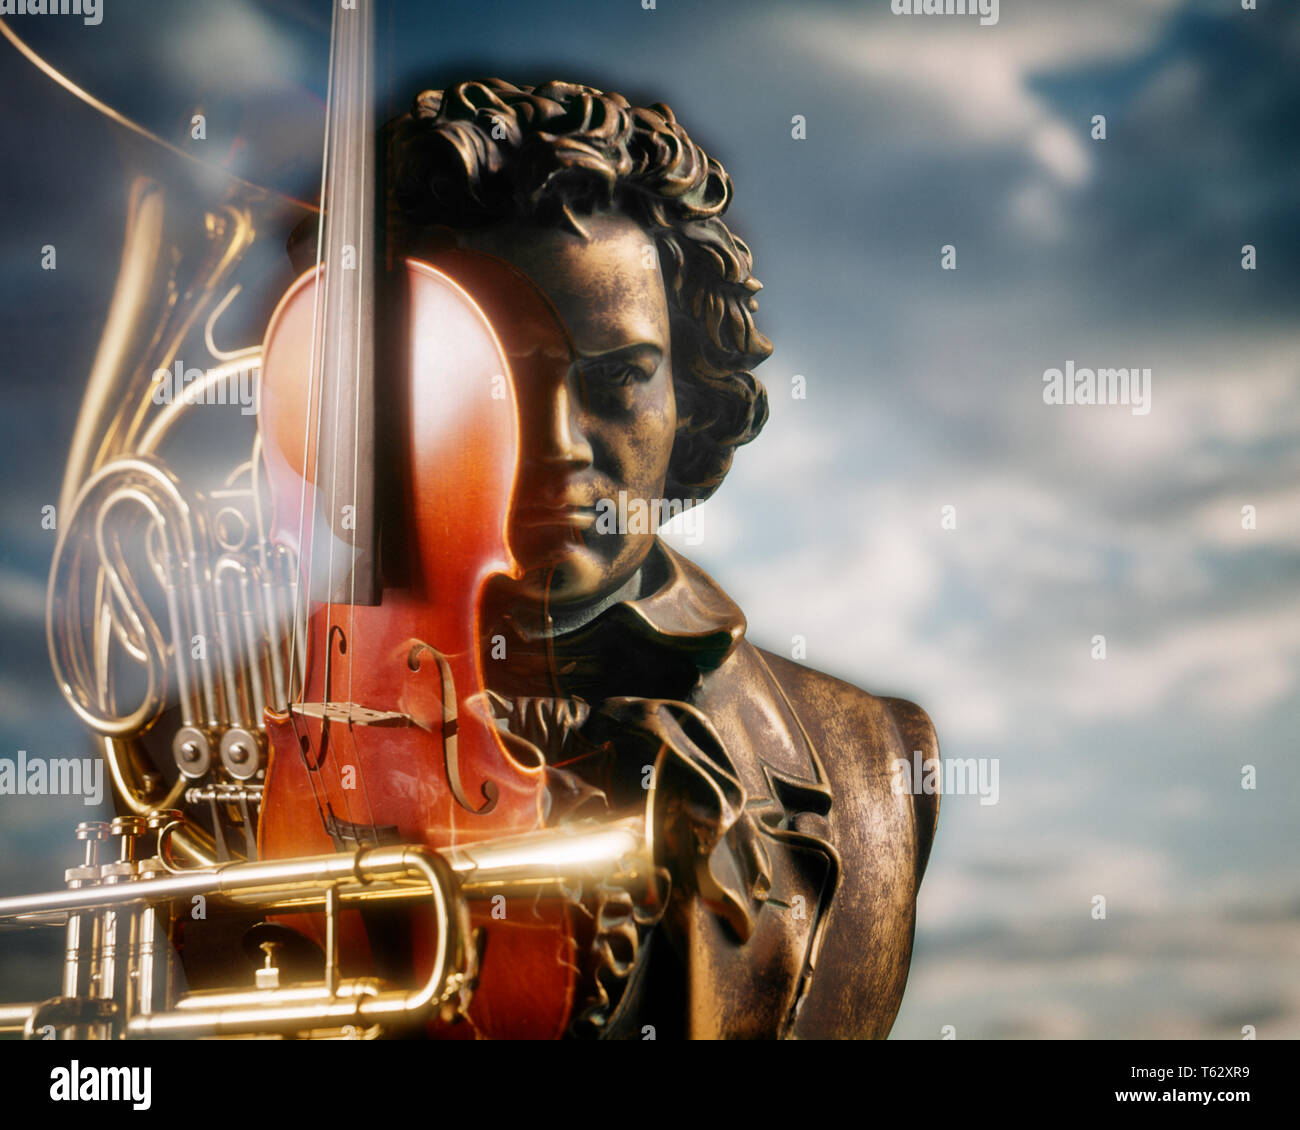 1980s BUST OF BEETHOVEN CLASSICAL MUSIC SYMBOLIC MONTAGE WITH INSTRUMENTS VIOLIN FRENCH HORN AND TRUMPET CLOUDS BACKGROUND  - km7076 PHT001 HARS HEAD AND SHOULDERS BUST AND CAREERS COMPOSITE OF GENIUS OCCUPATIONS COMPOSER MUSICAL INSTRUMENT CONCEPT CONCEPTUAL STILL LIFE IMAGINATION BEETHOVEN 1770 GREATEST SYMBOLIC 9 CONCEPTS CREATIVITY LUDWIG VAN BEETHOVEN SYMPHONIC 1700s 1827 CAUCASIAN ETHNICITY FRENCH HORN OLD FASHIONED REPRESENTATION Stock Photo